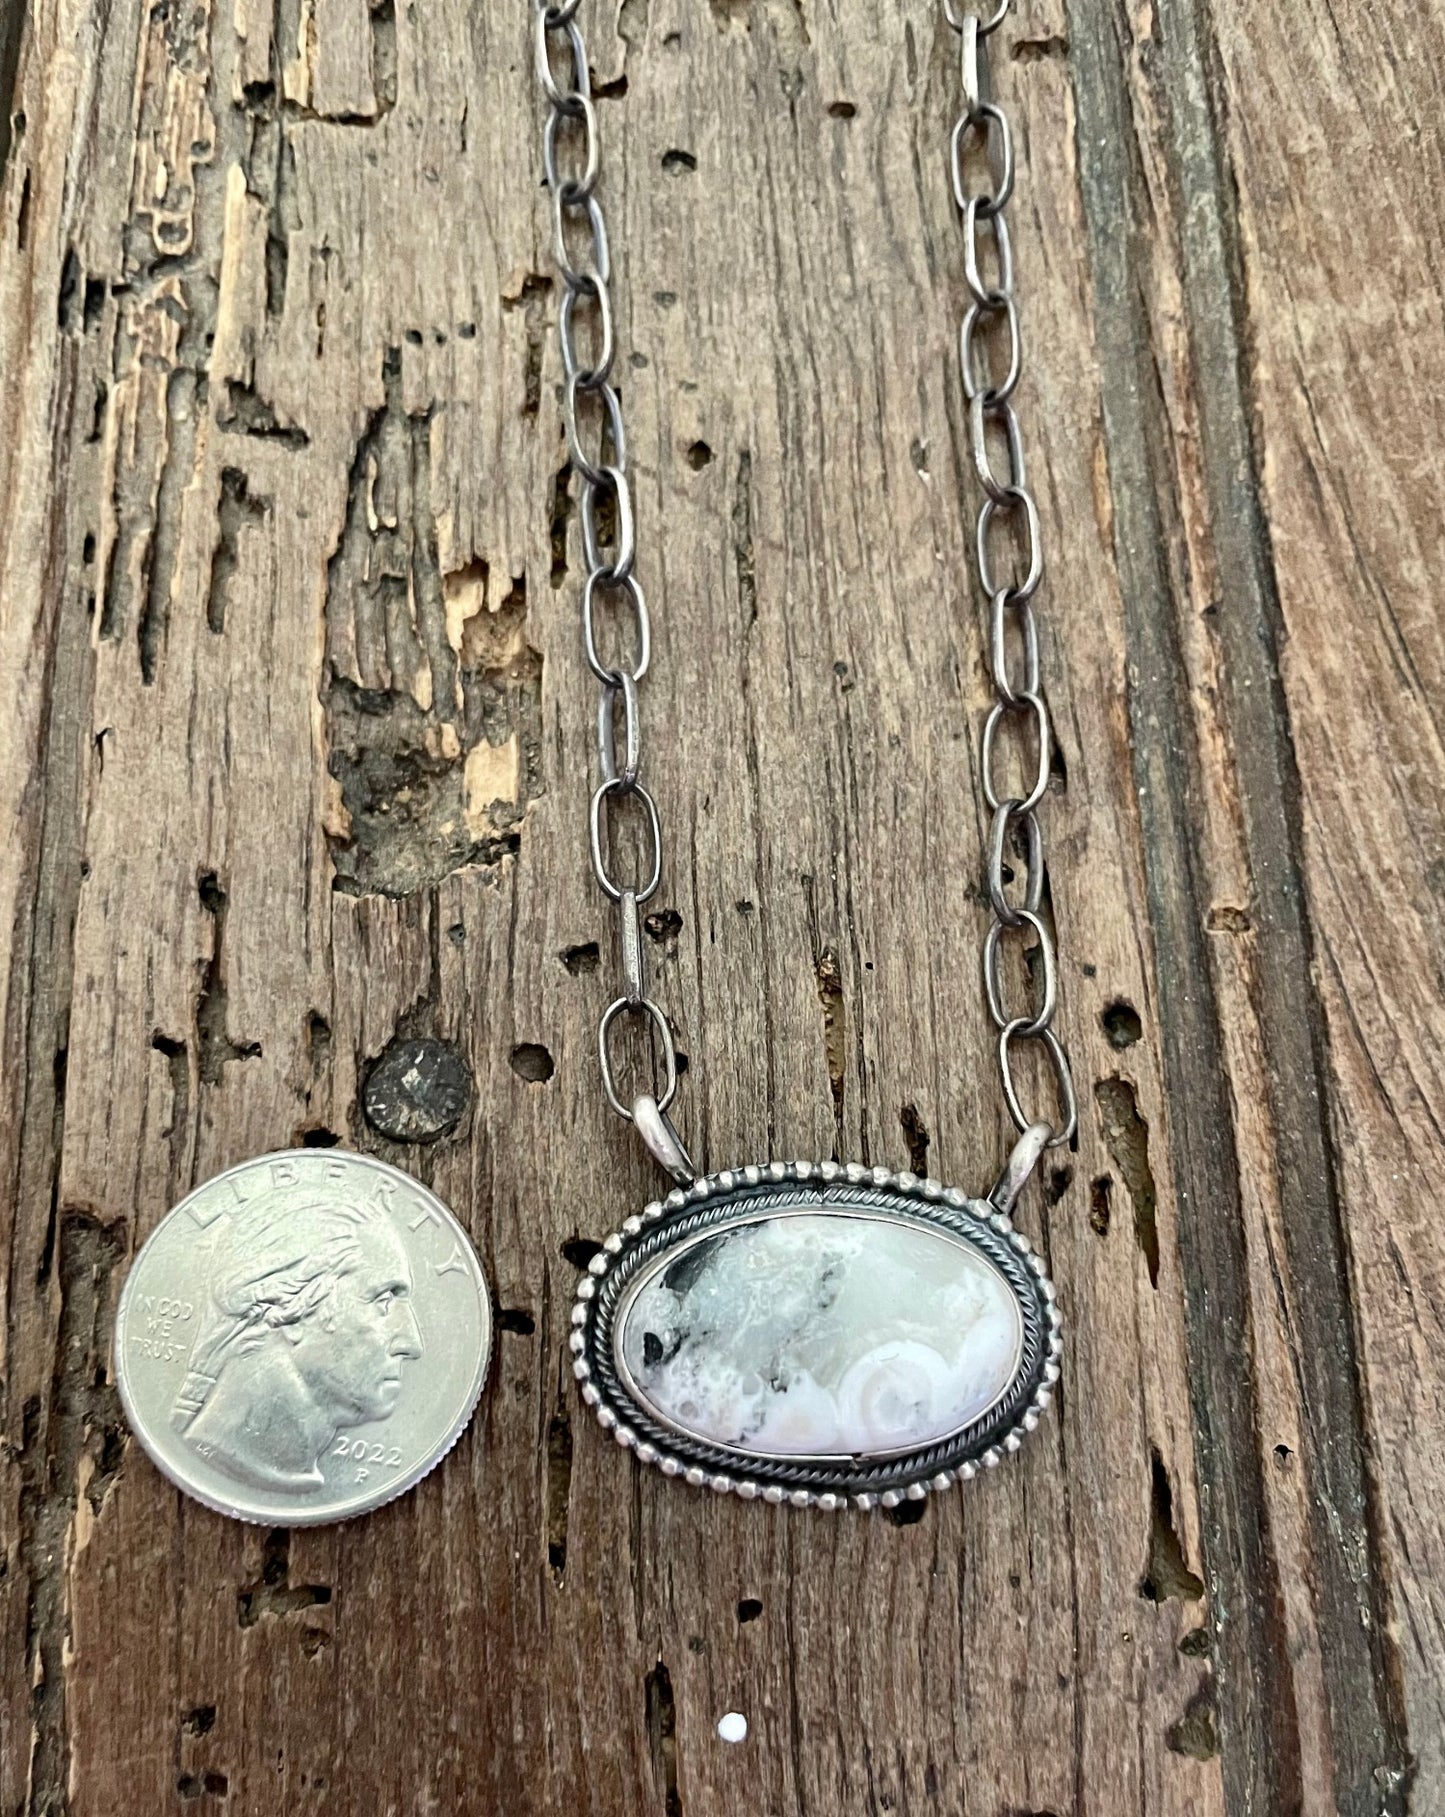 White Buffalo Oval Bar Necklace with quarter for size comparison